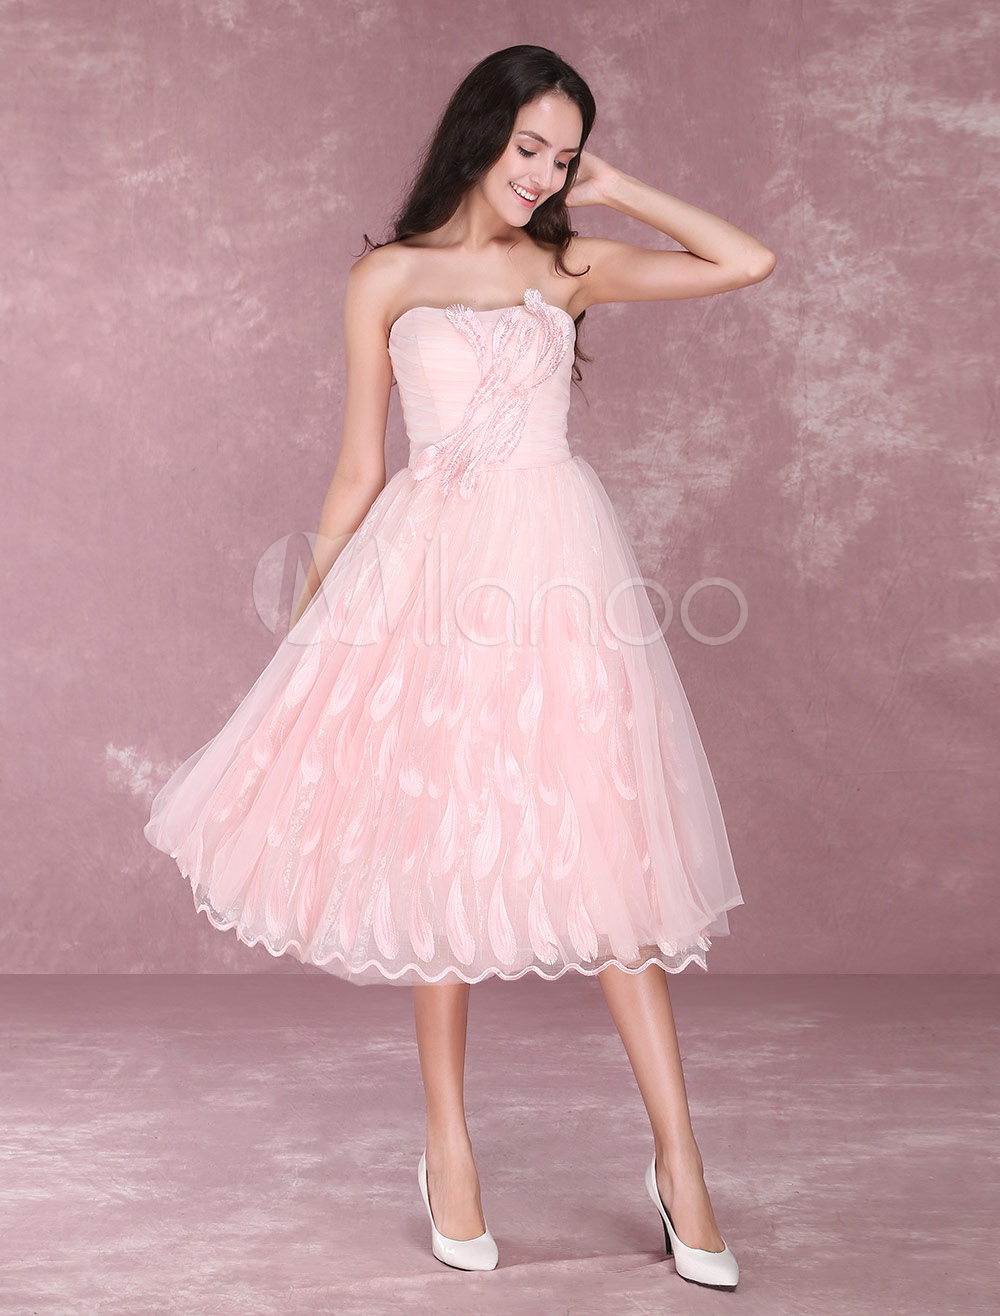 Soft Pink Prom Dresses Tulle Lace Further Detail Homecoming Dresses Strapless Sleeveless Pleated Knee Length Cocktail Dress (Wedding) photo